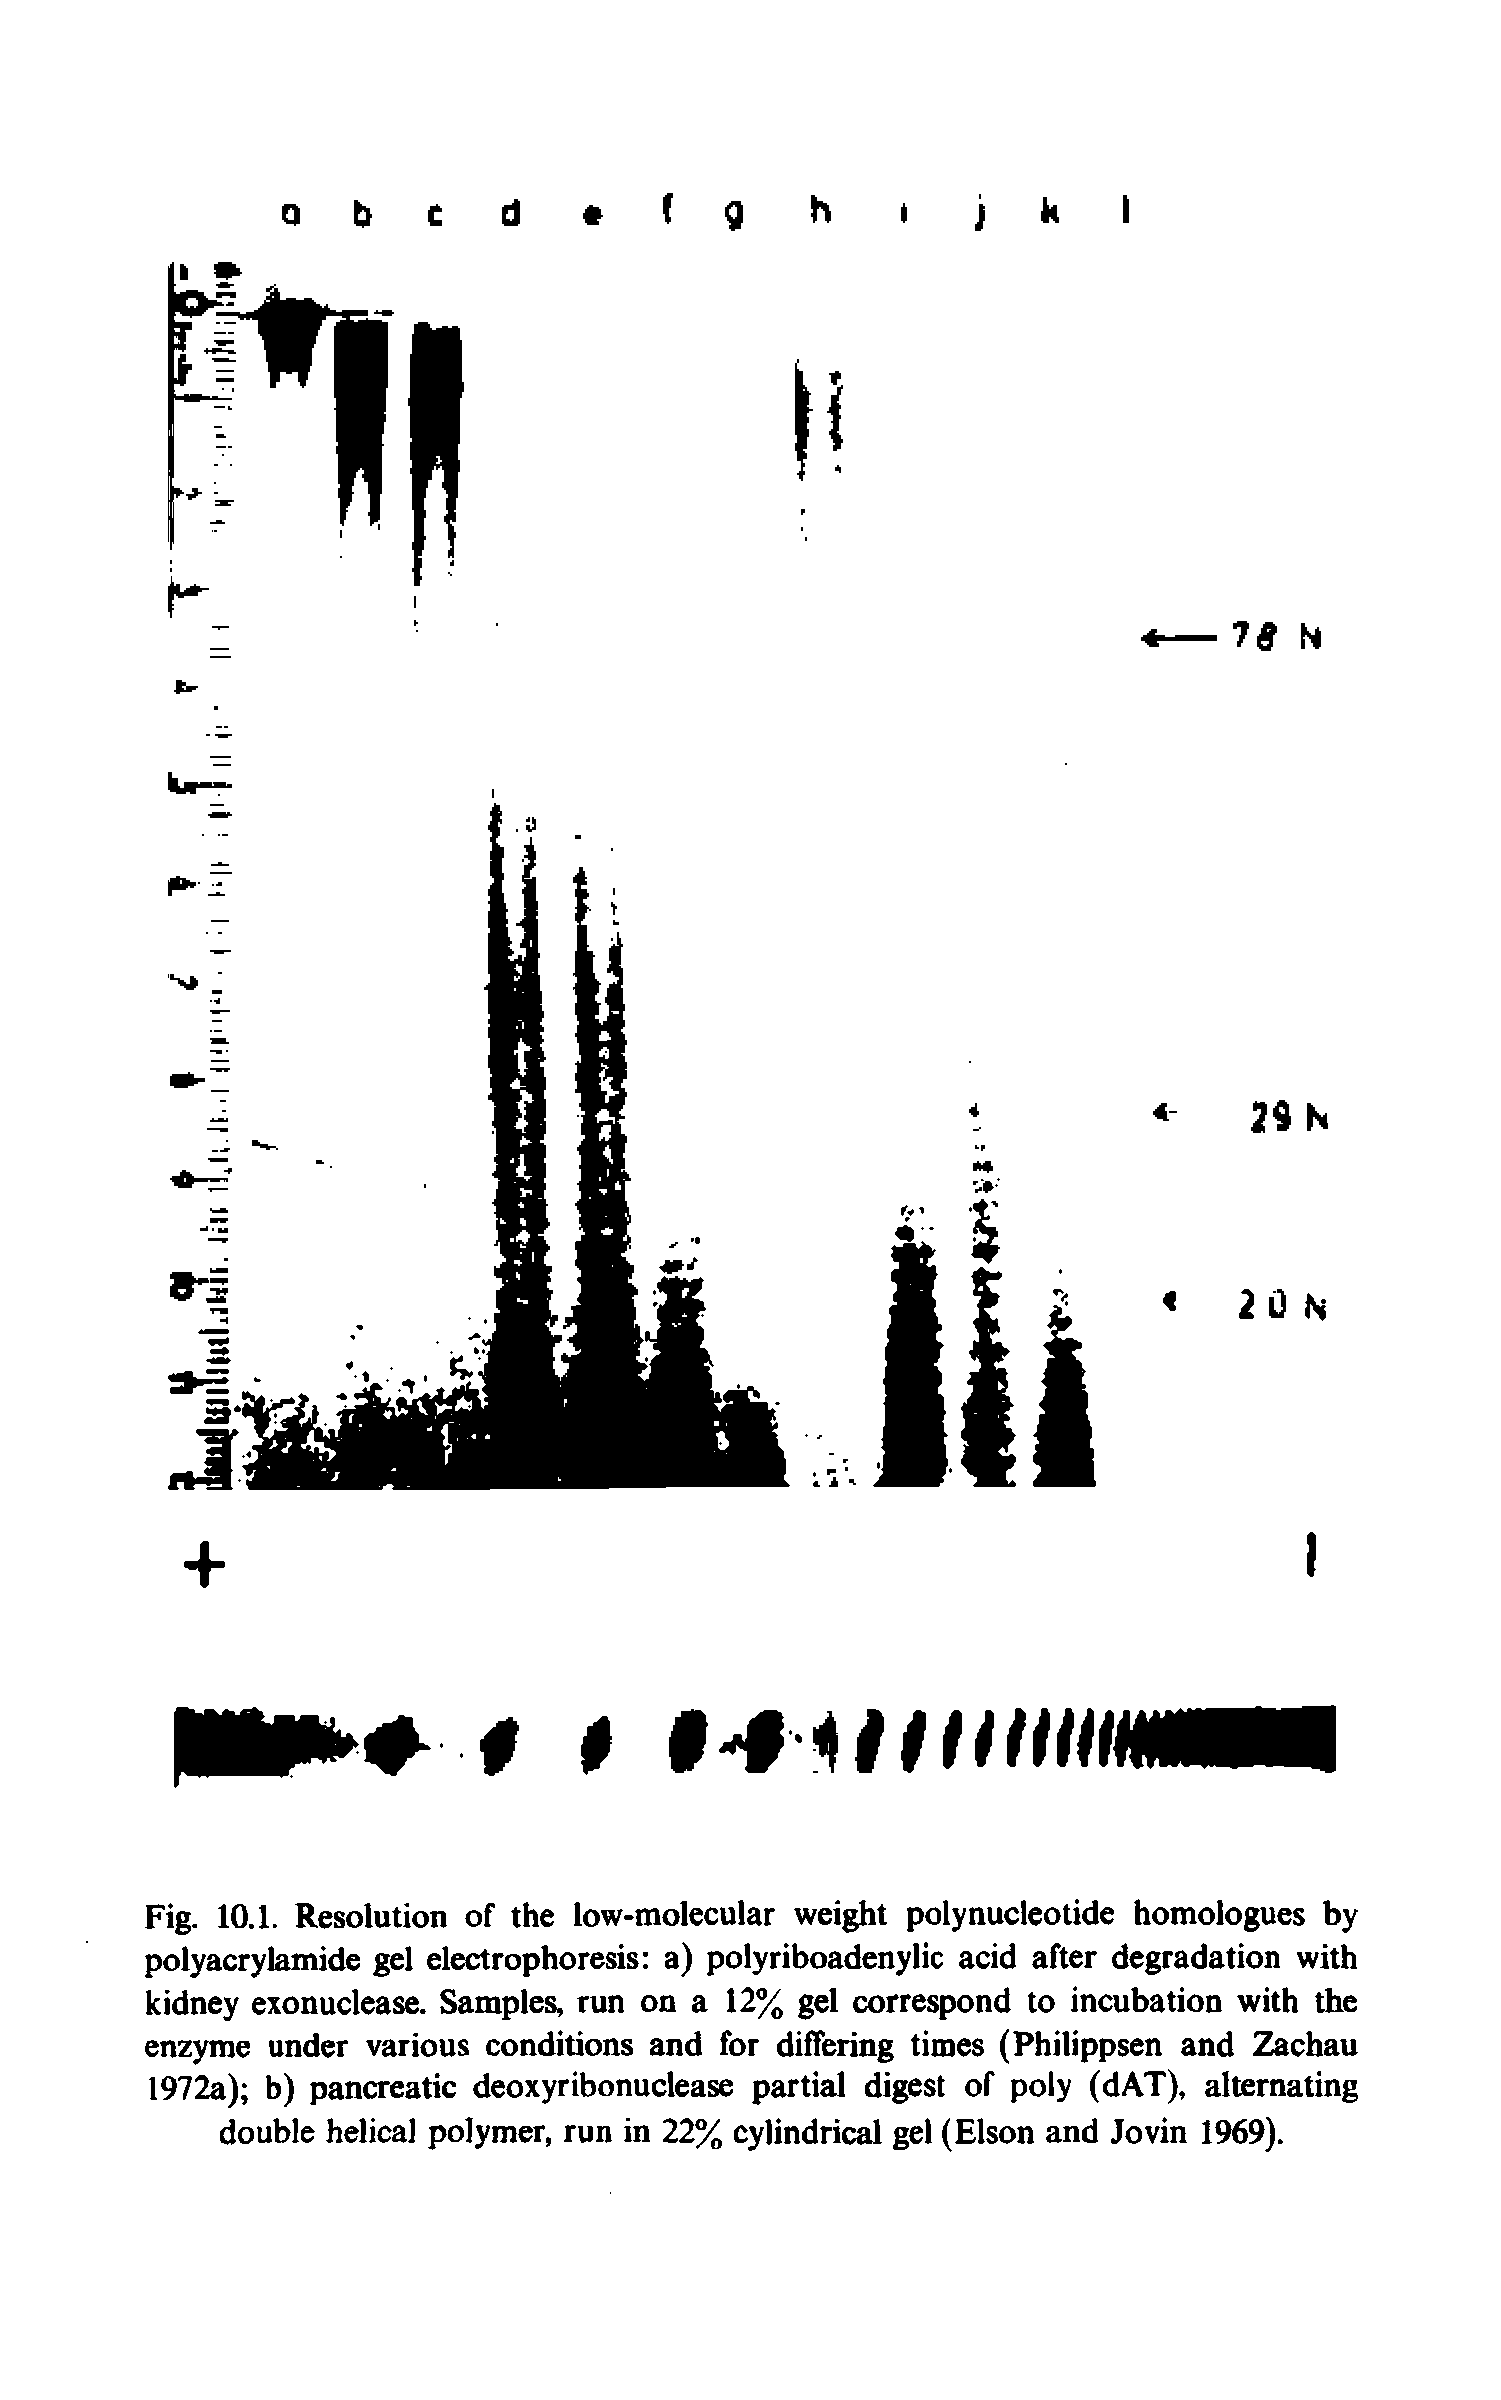 Fig. 10.1. Resolution of the low-molecular weight polynucleotide homologues by polyacrylamide gel electrophoresis a) polyriboadenylie acid after degradation with kidney exonuclease. Samples, run on a 12% gel correspond to incubation with the enzyme under various conditions and for dilTering times (Philippsen and Zachau 1972a) b) pancreatic deoxyribonuclease partial digest of poly (dAT), alternating double helical polymer, run in 22% cylindrical gel (Elson and Jovin 1969).